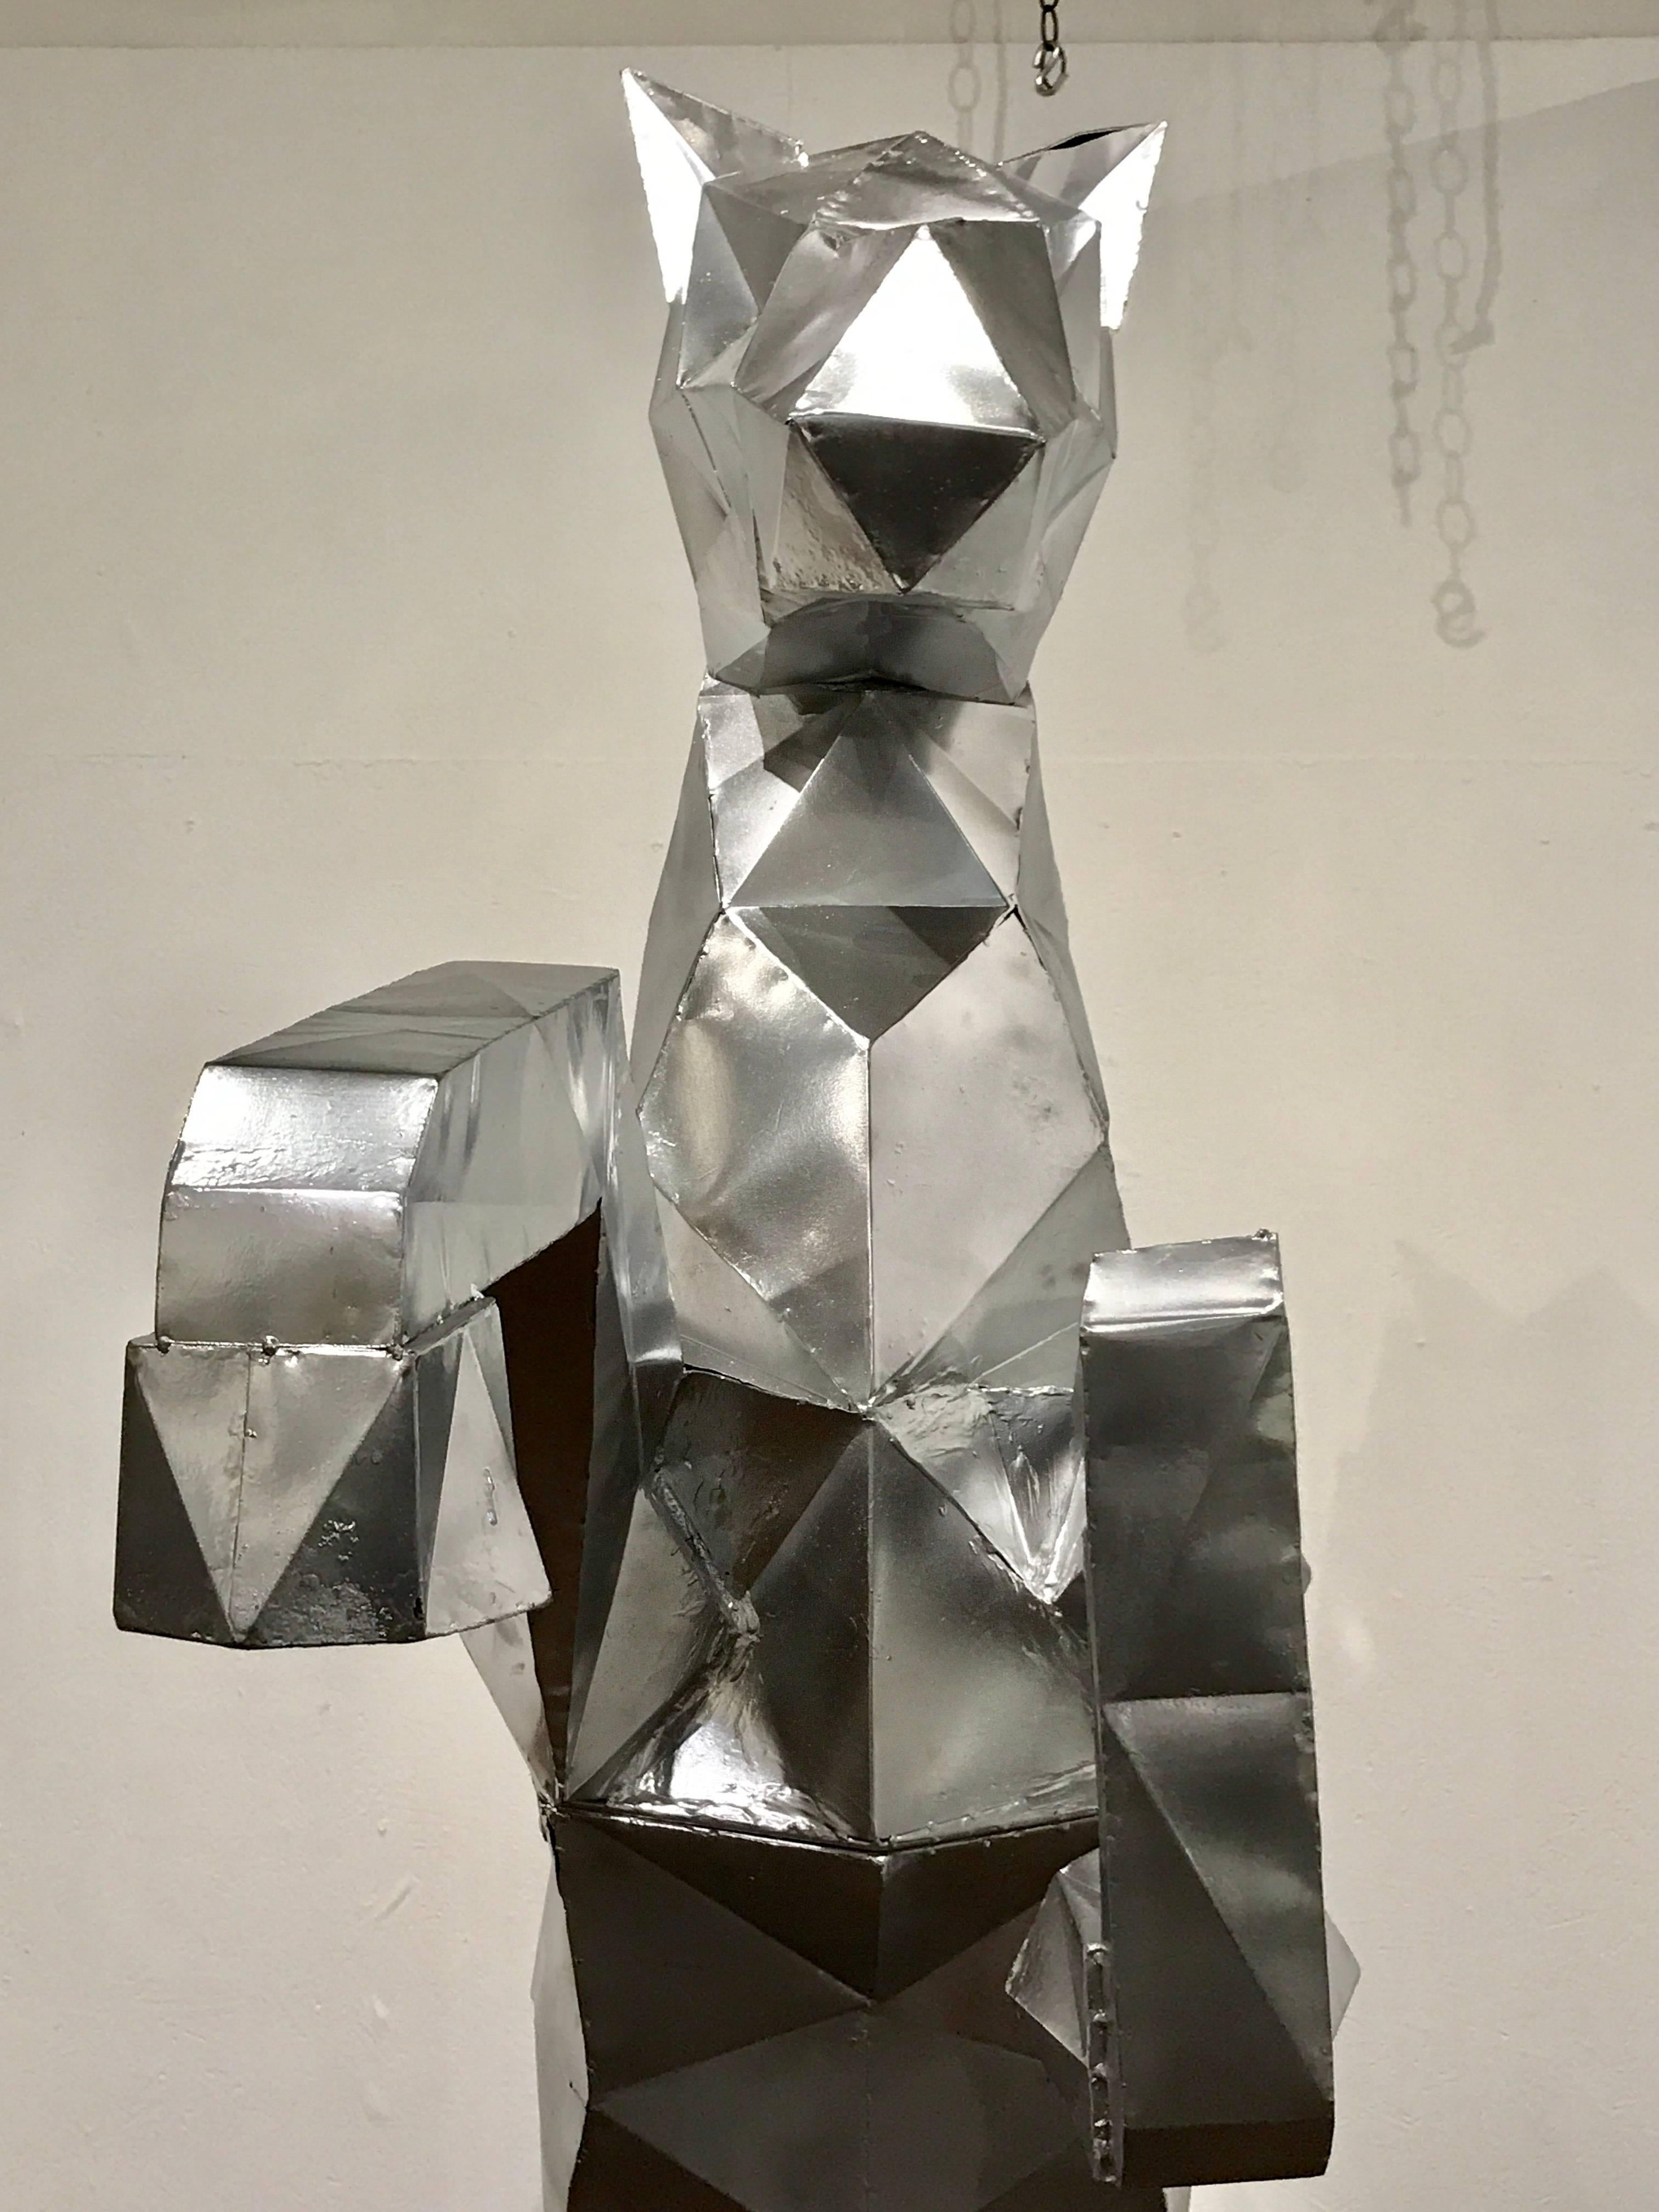 North American Lifesize Cubist Rearing Horse Sculpture, in the Style of Ben Foster